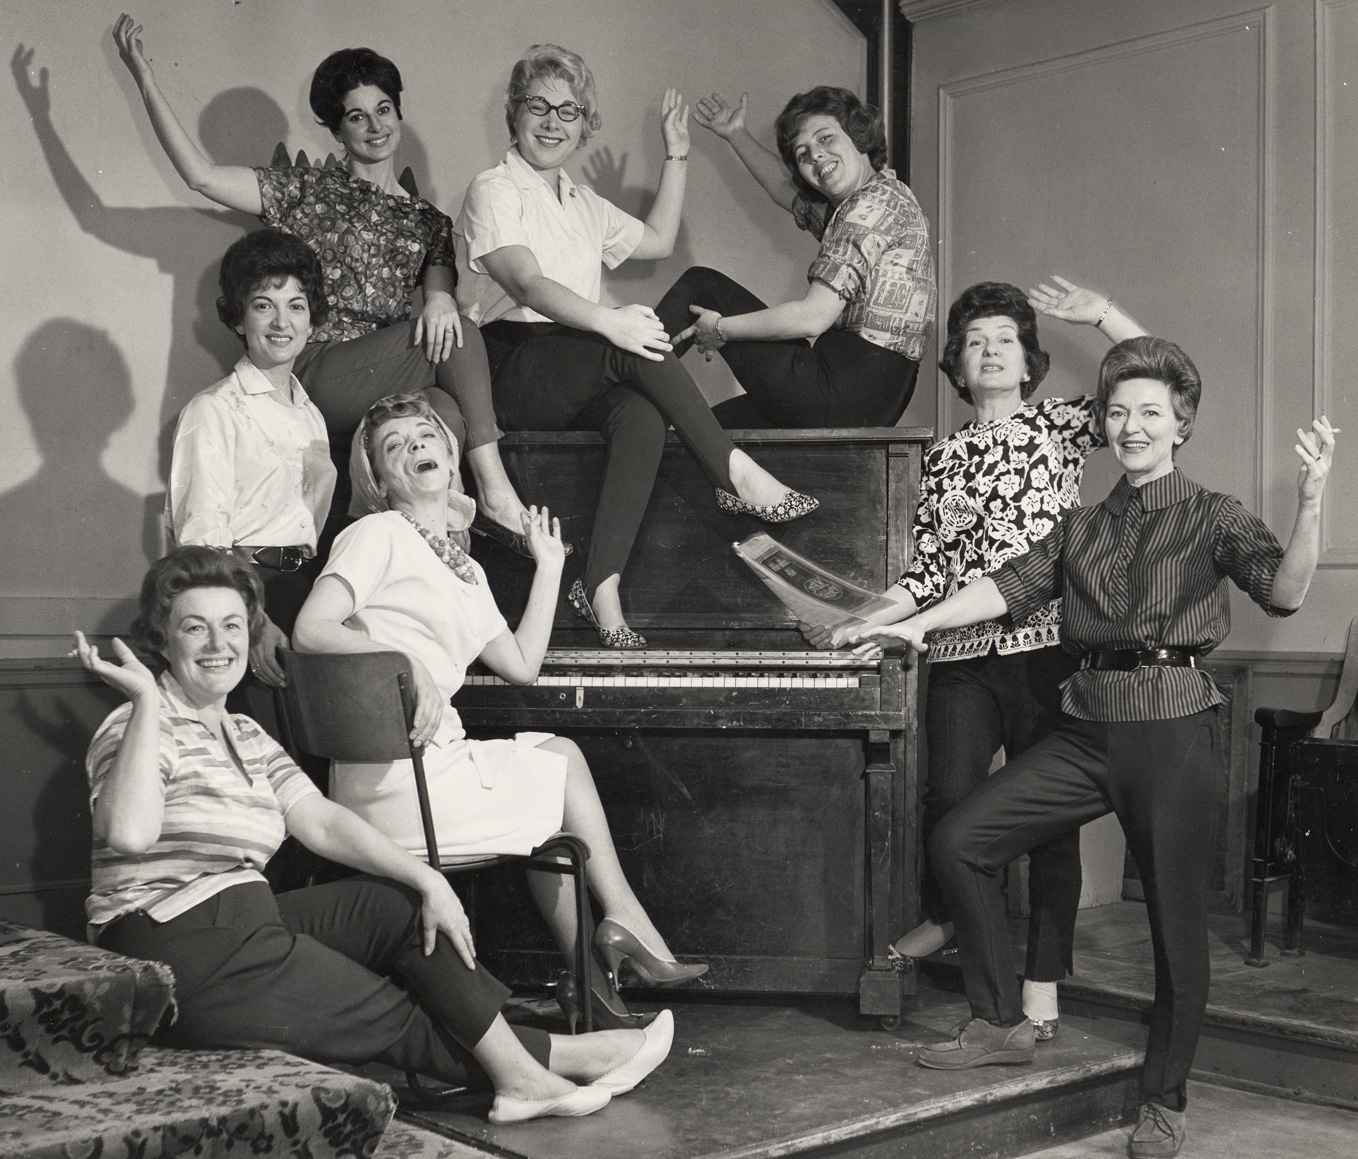 The cast of Shalom, a United Jewish Appeal production, Vancouver, B.C. 1950.